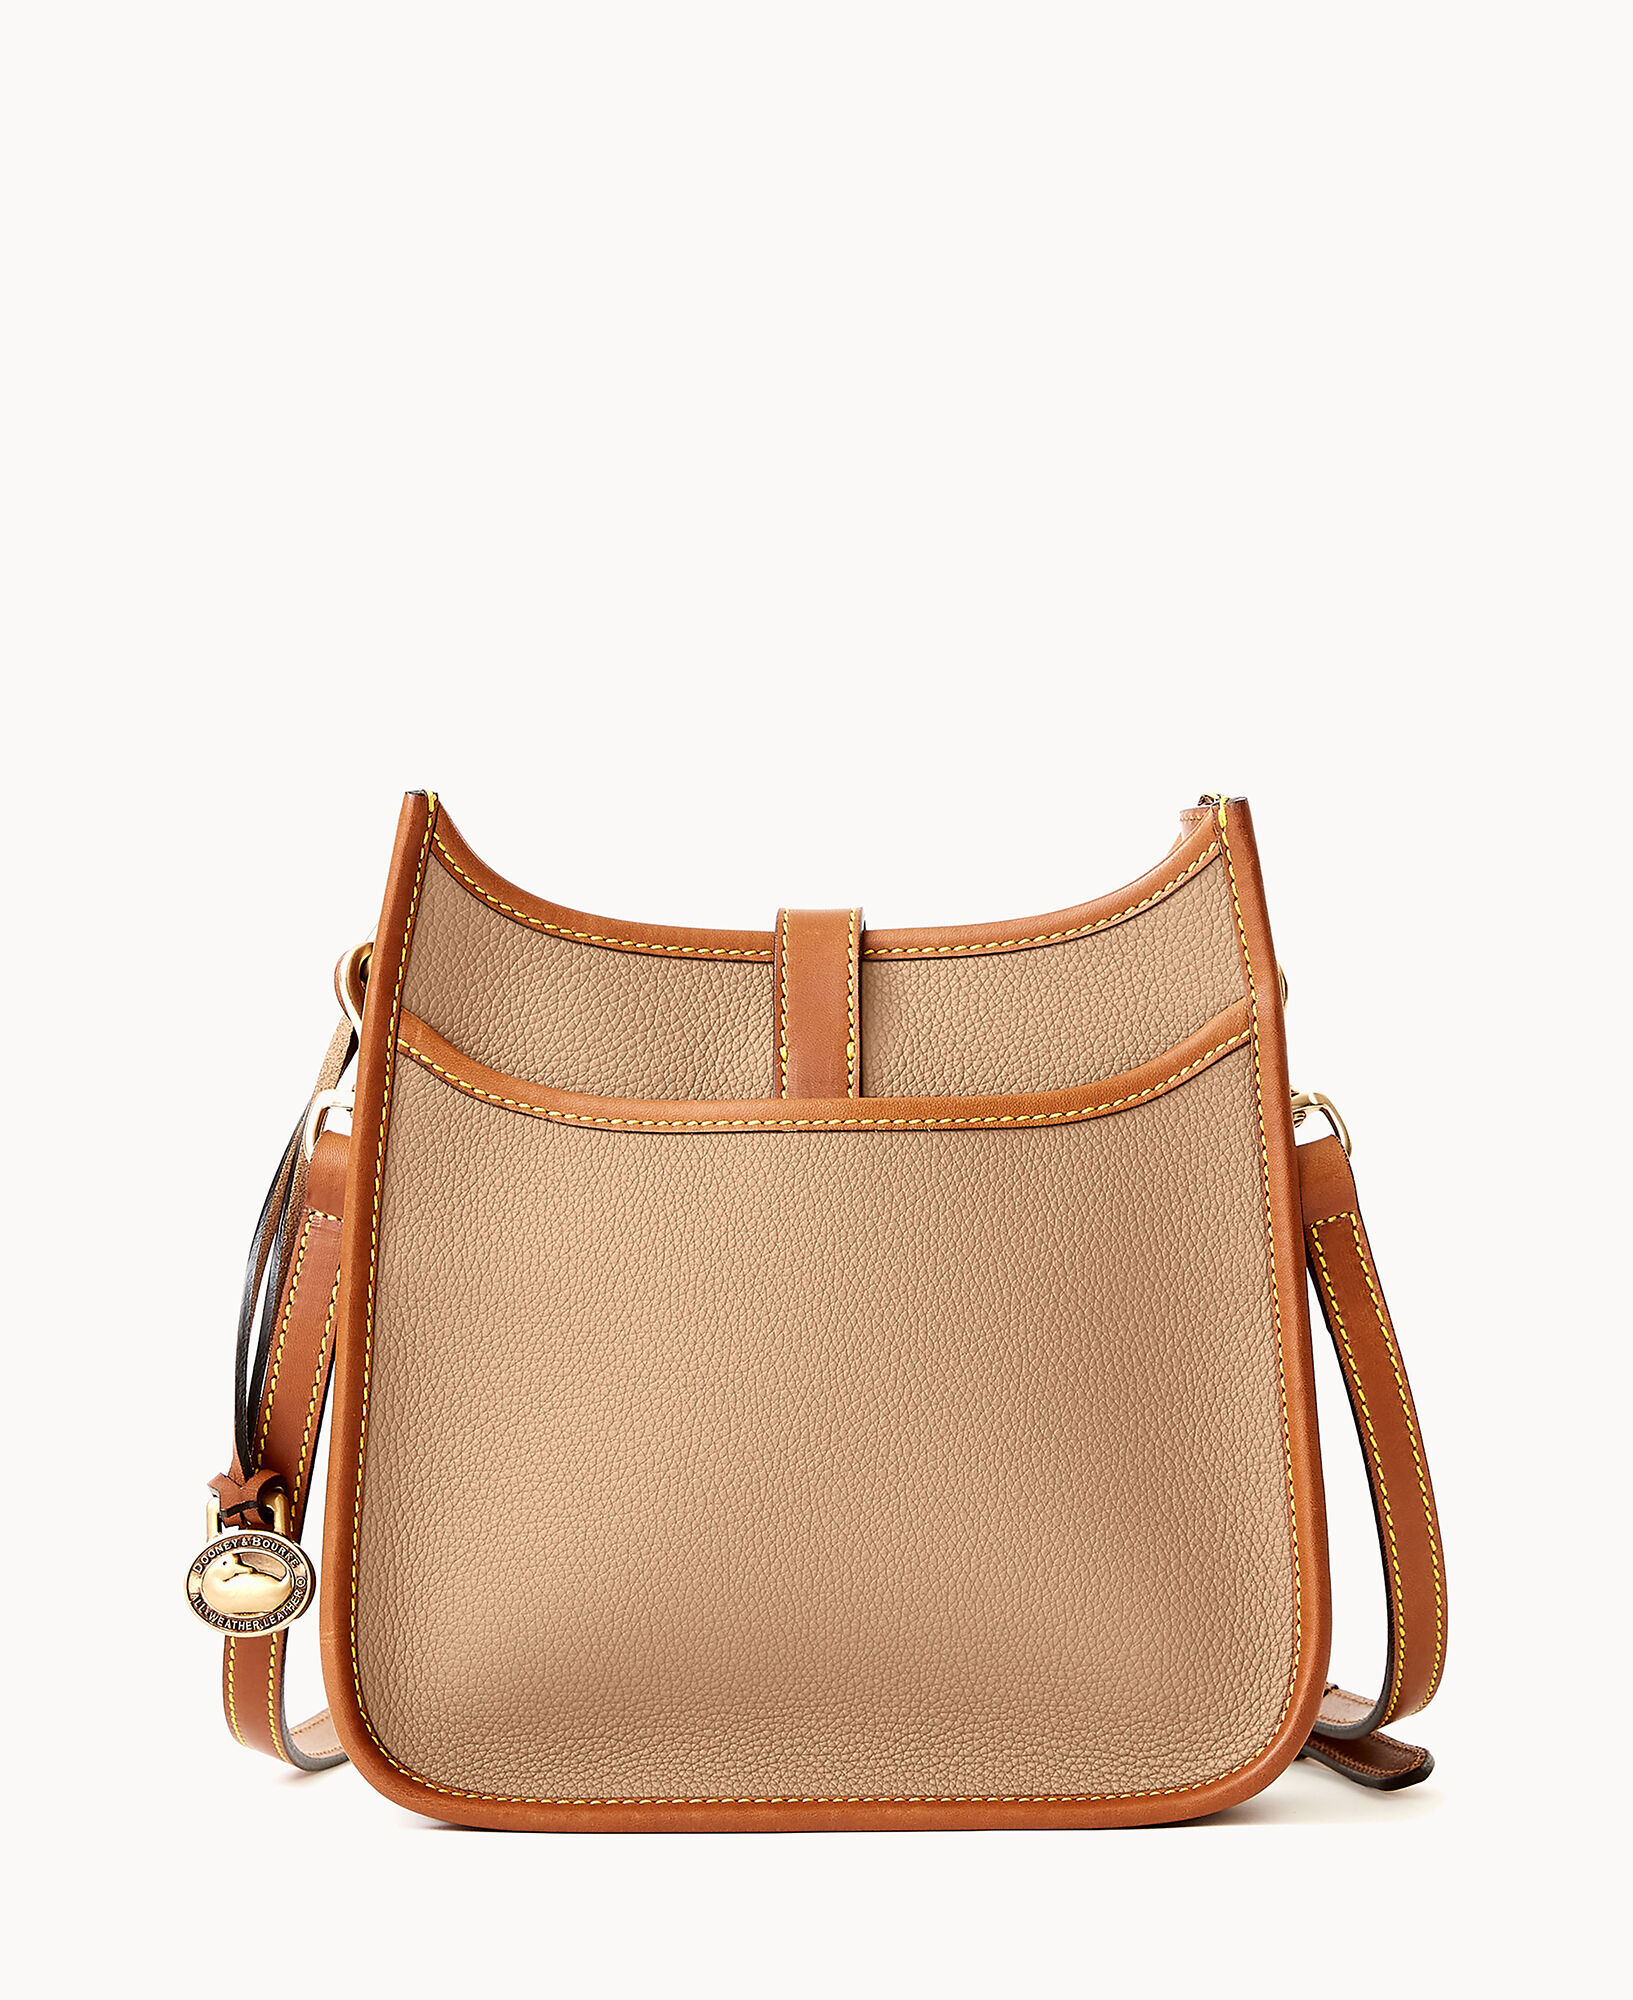 Crossbody Designer By Dooney And Bourke Size: Small